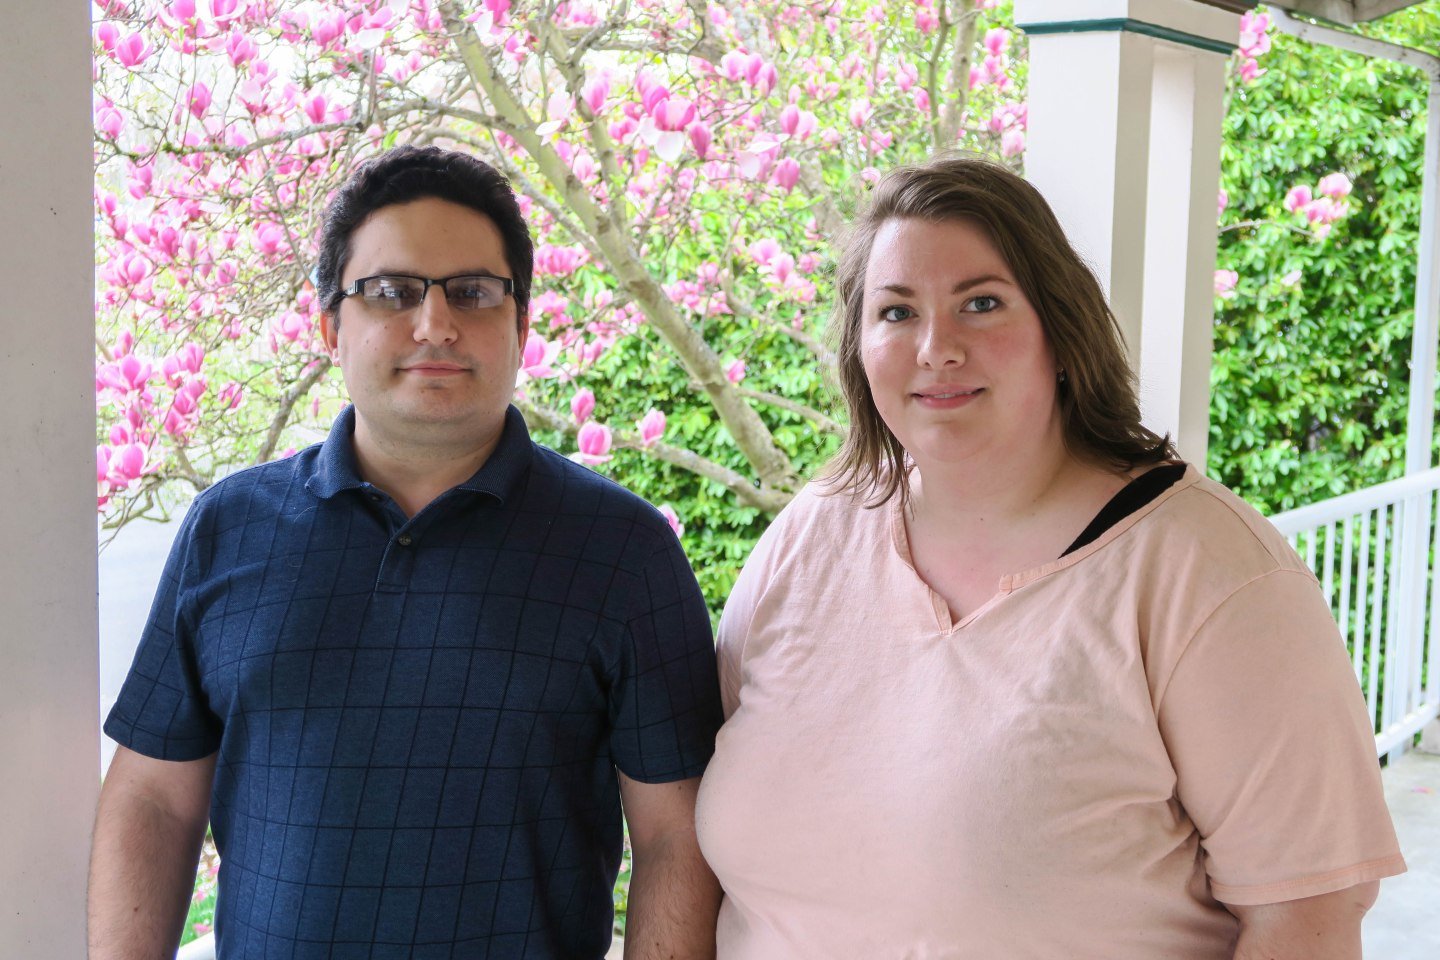 Centralia College instructors, Alisha Williams and Gordon Gul built an app that gives students a visual representation of their skills